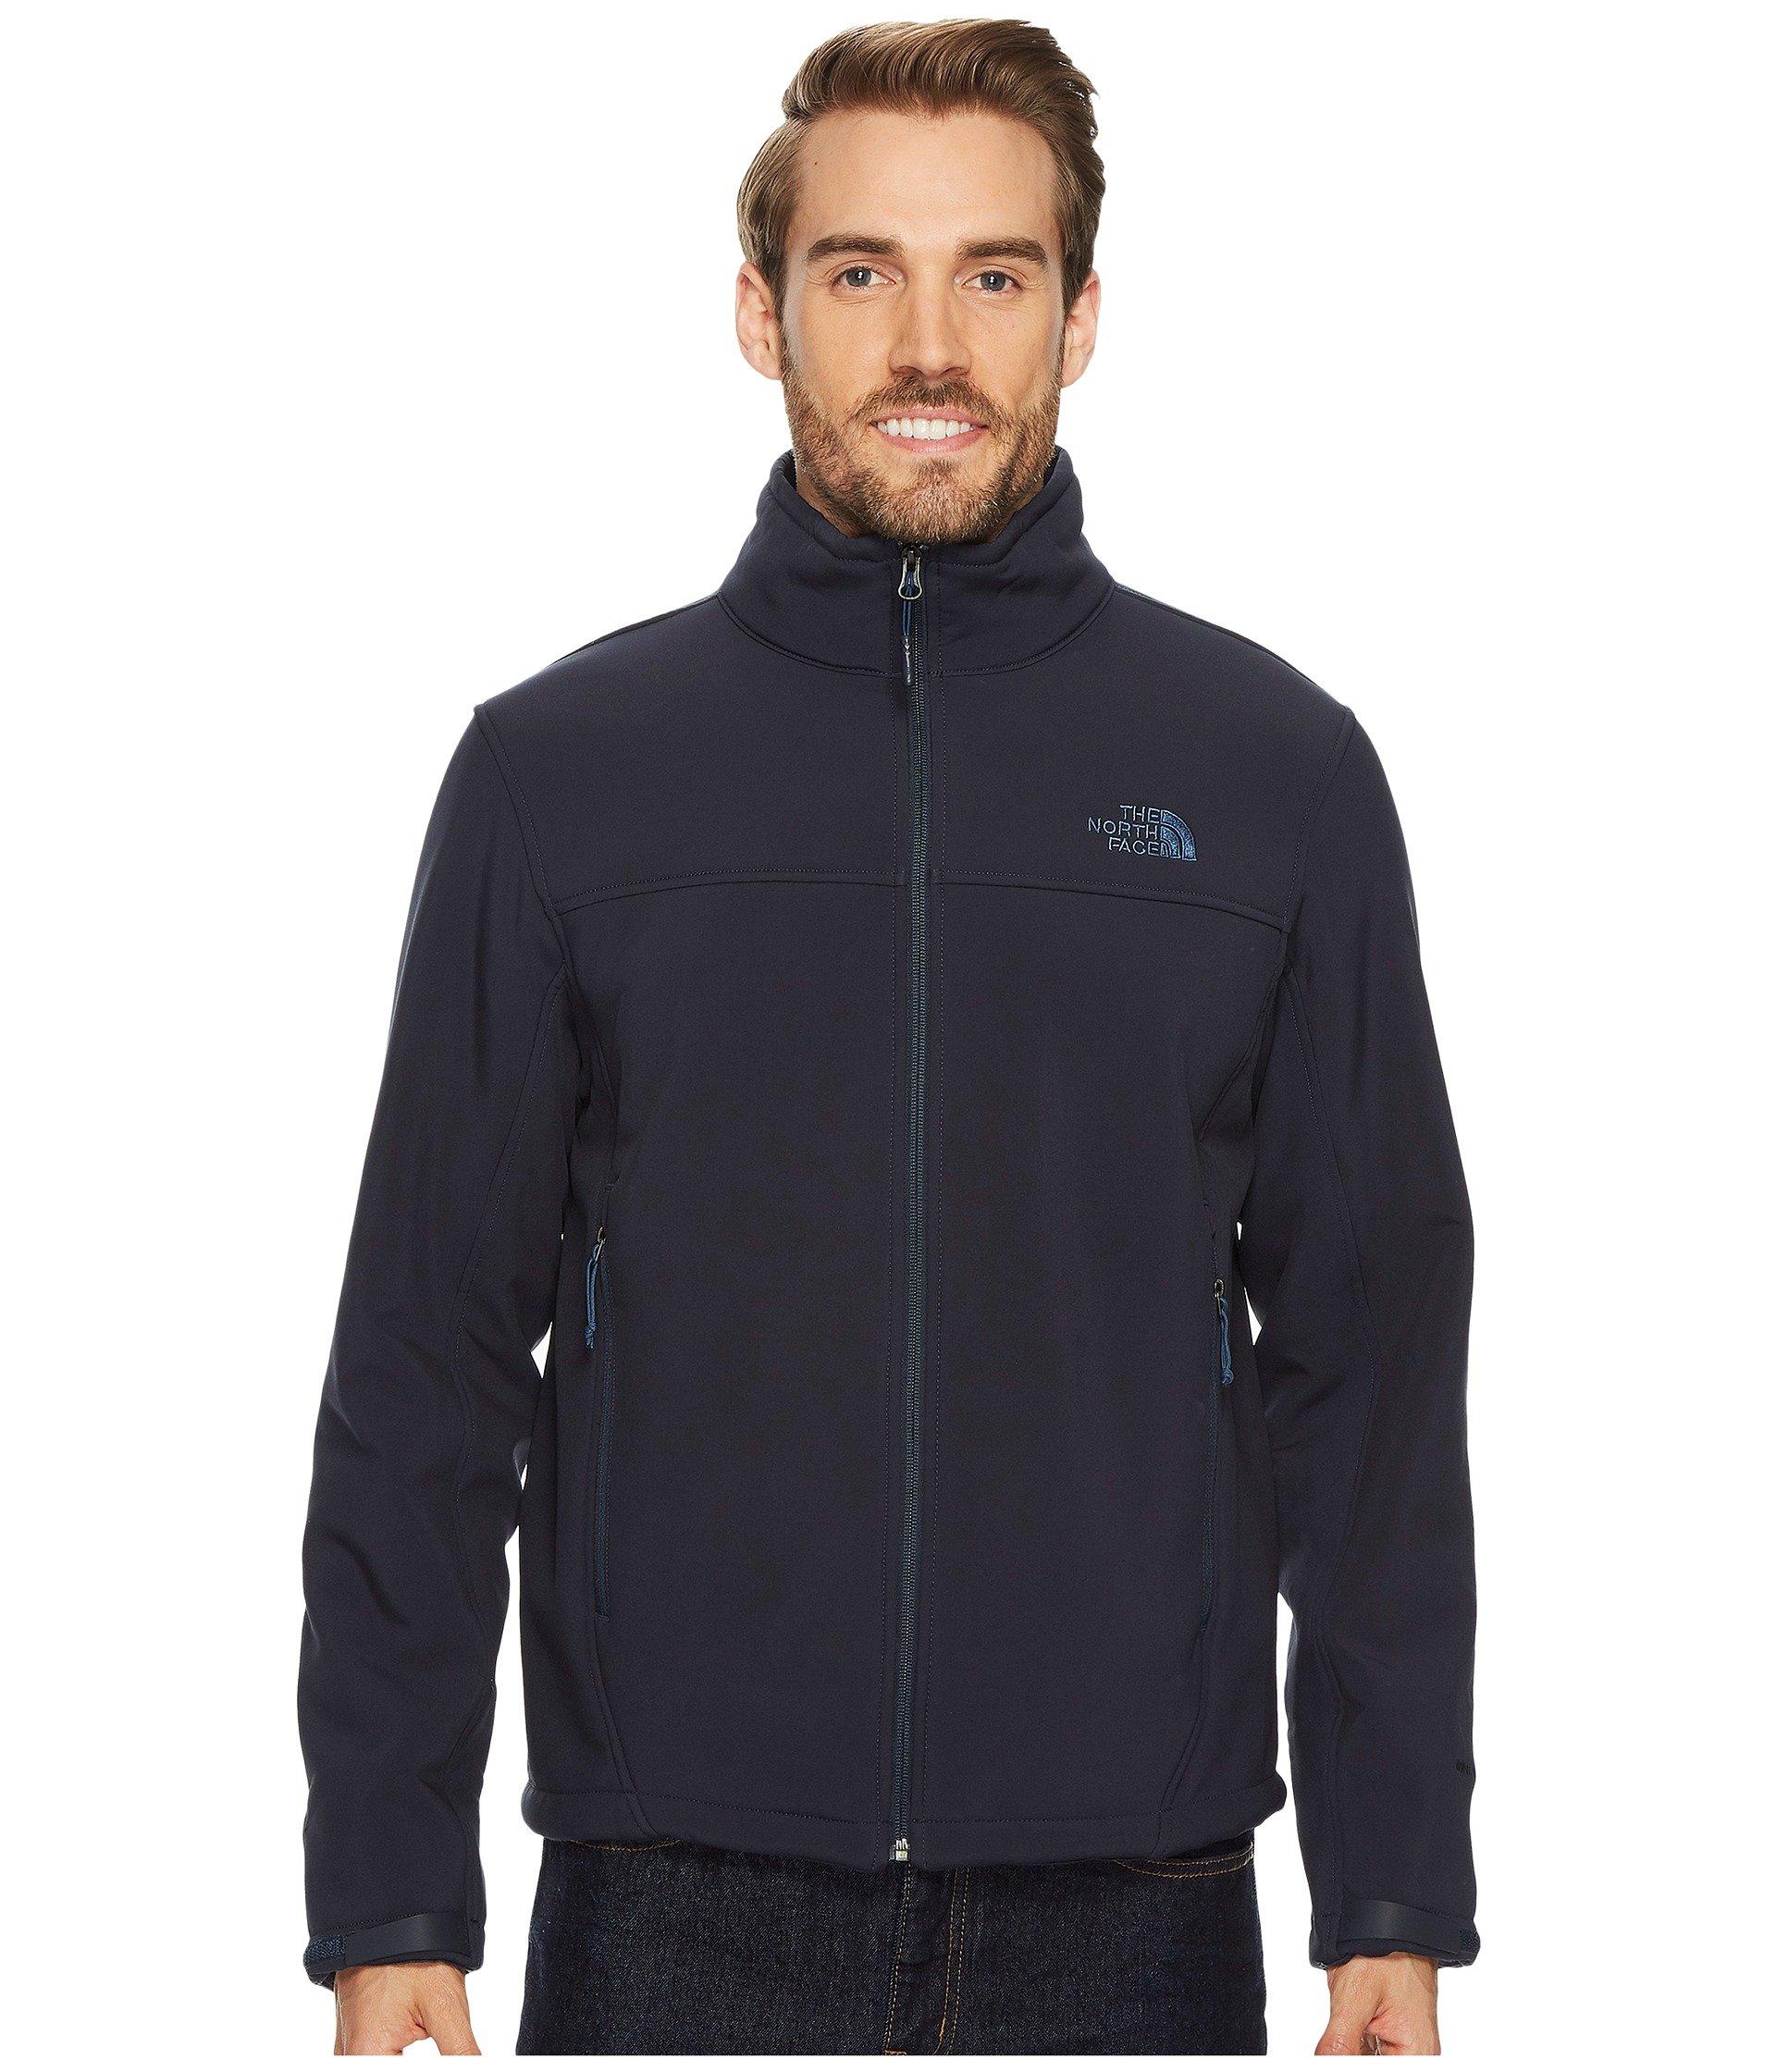 The North Face Fleece Apex Chromium Thermal Jacket in Navy (Blue) for